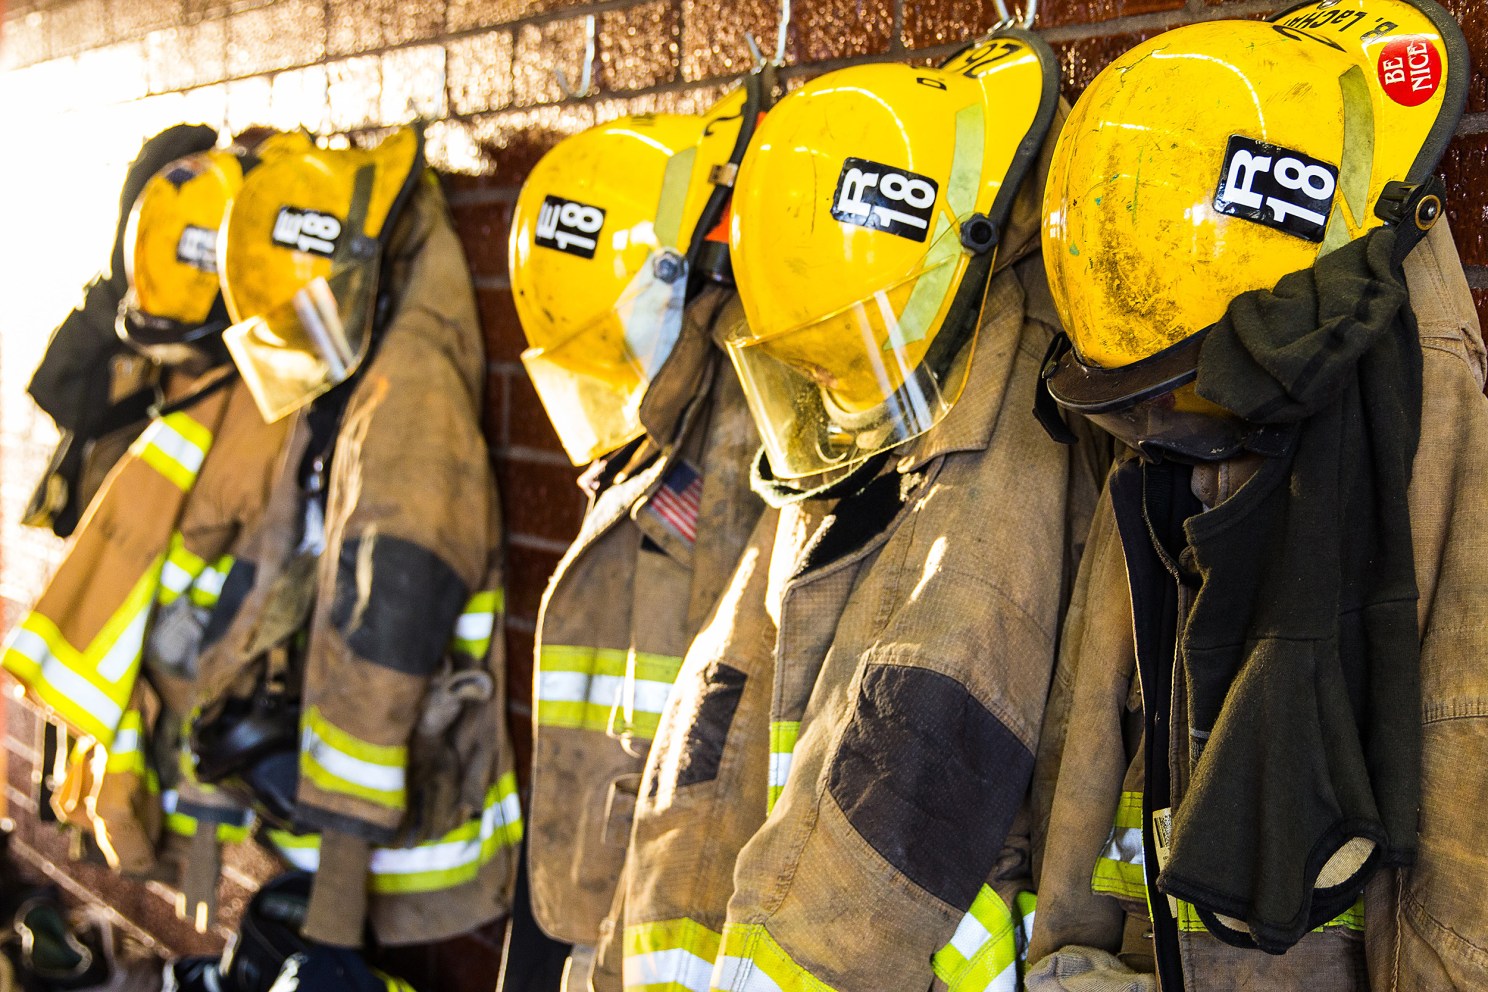 Fire fighters' uniforms.